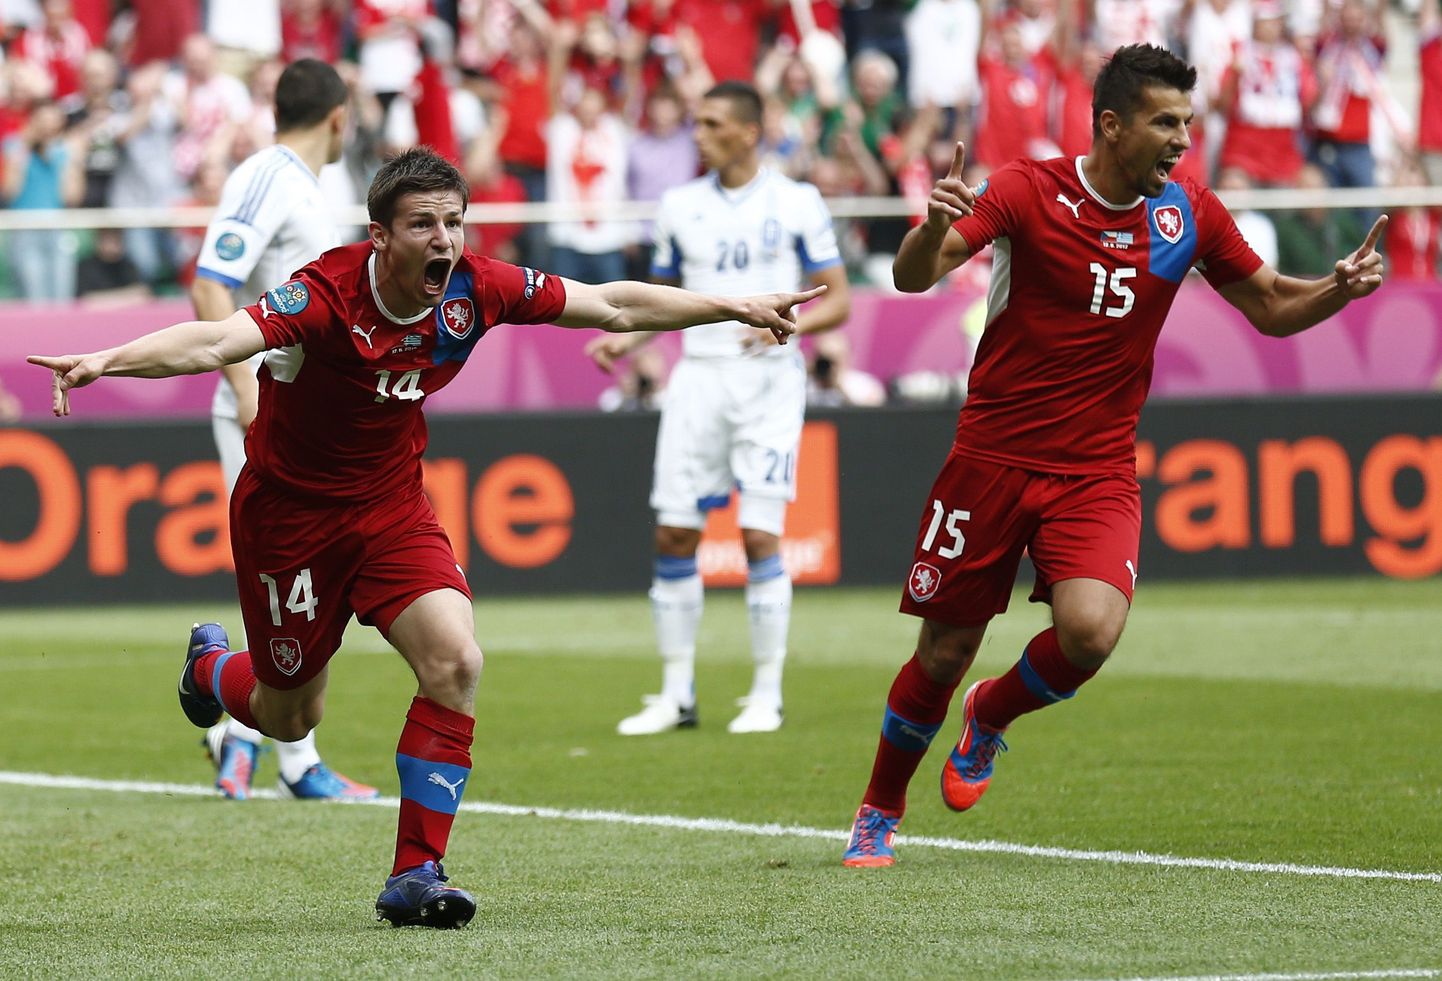 Czech Republic's Vaclav Pilar celebrates his goal against Greece with his team mate Milan Baros (R) during their Group A Euro 2012 soccer match at the city stadium in Wroclaw, June 12, 2012.                REUTERS/Dominic Ebenbichler (POLAND  - Tags: SPORT SOCCER)